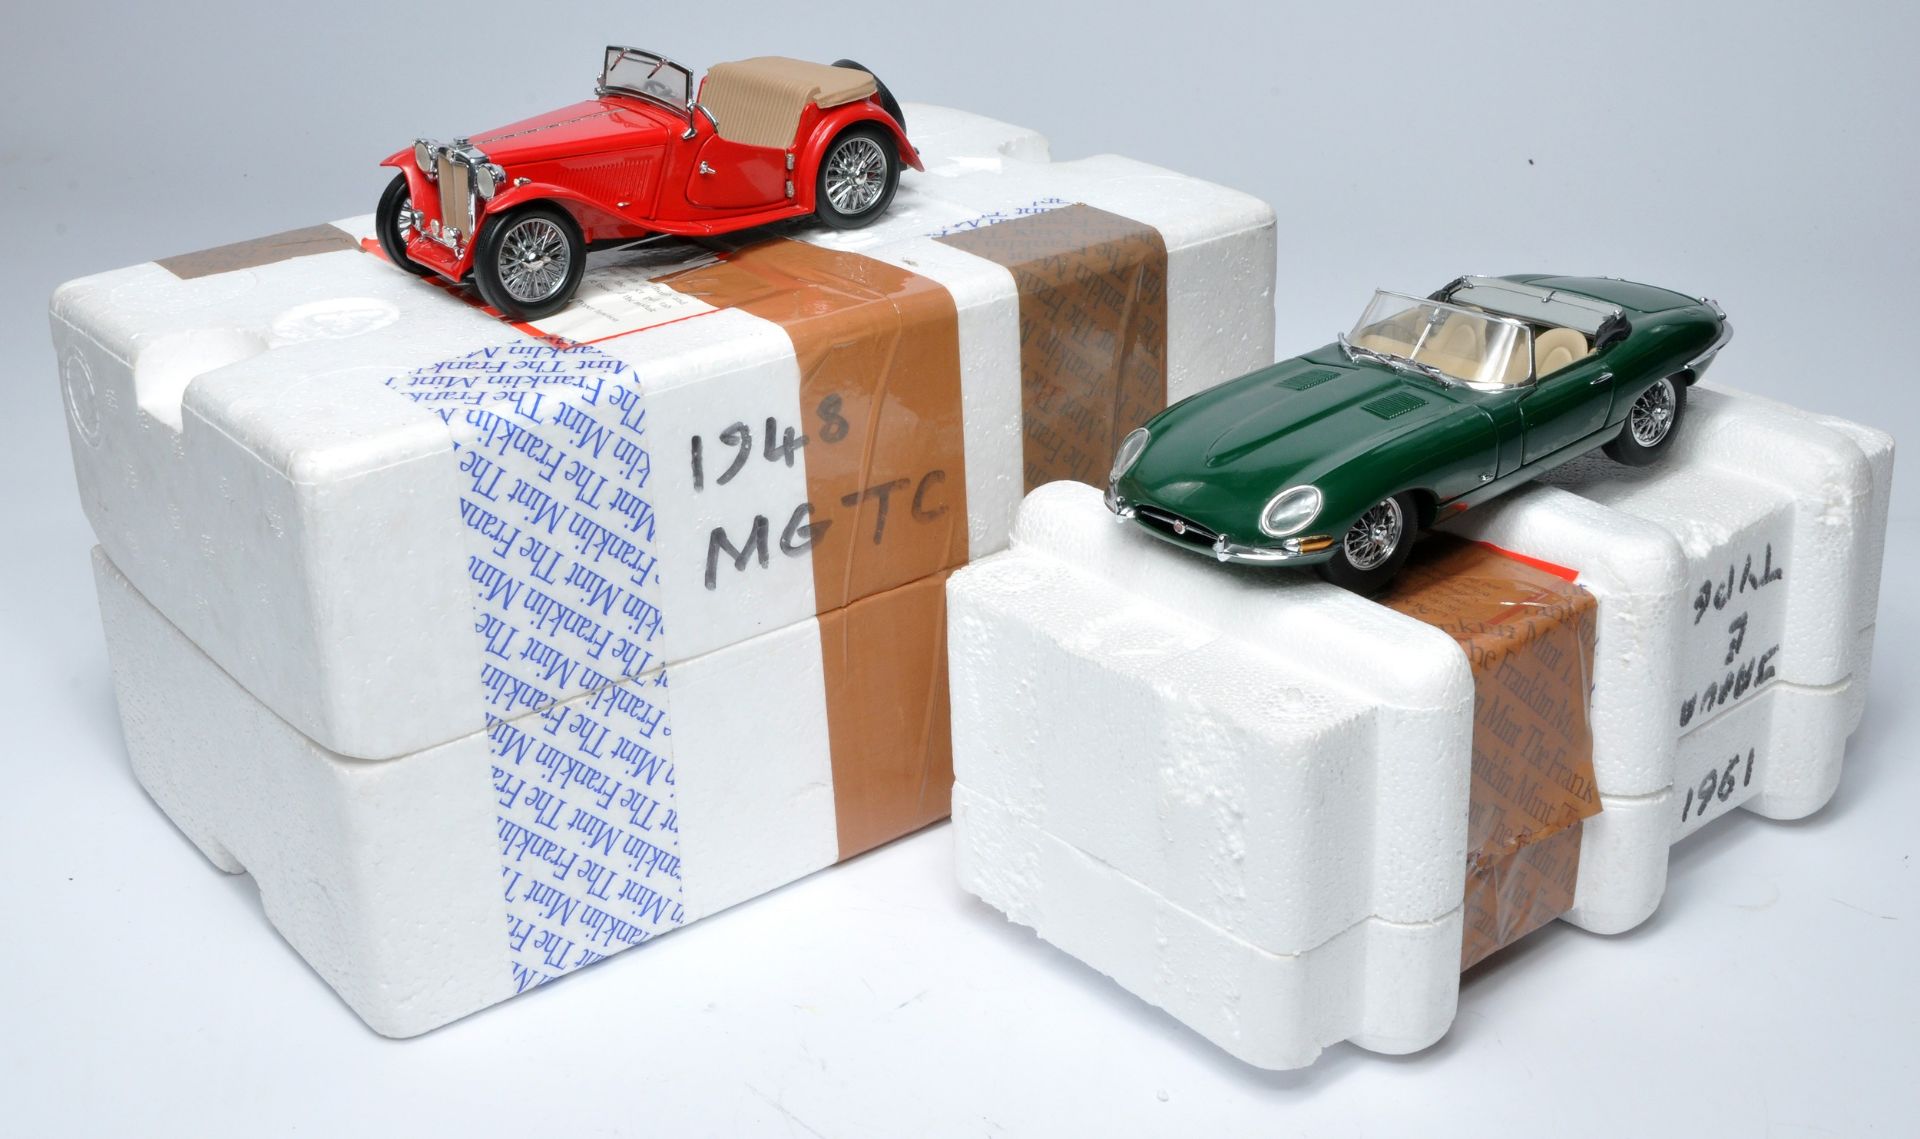 Franklin Mint 1/24 diecast model issues comprising Jaguar E Type plus MGC. Look to be without